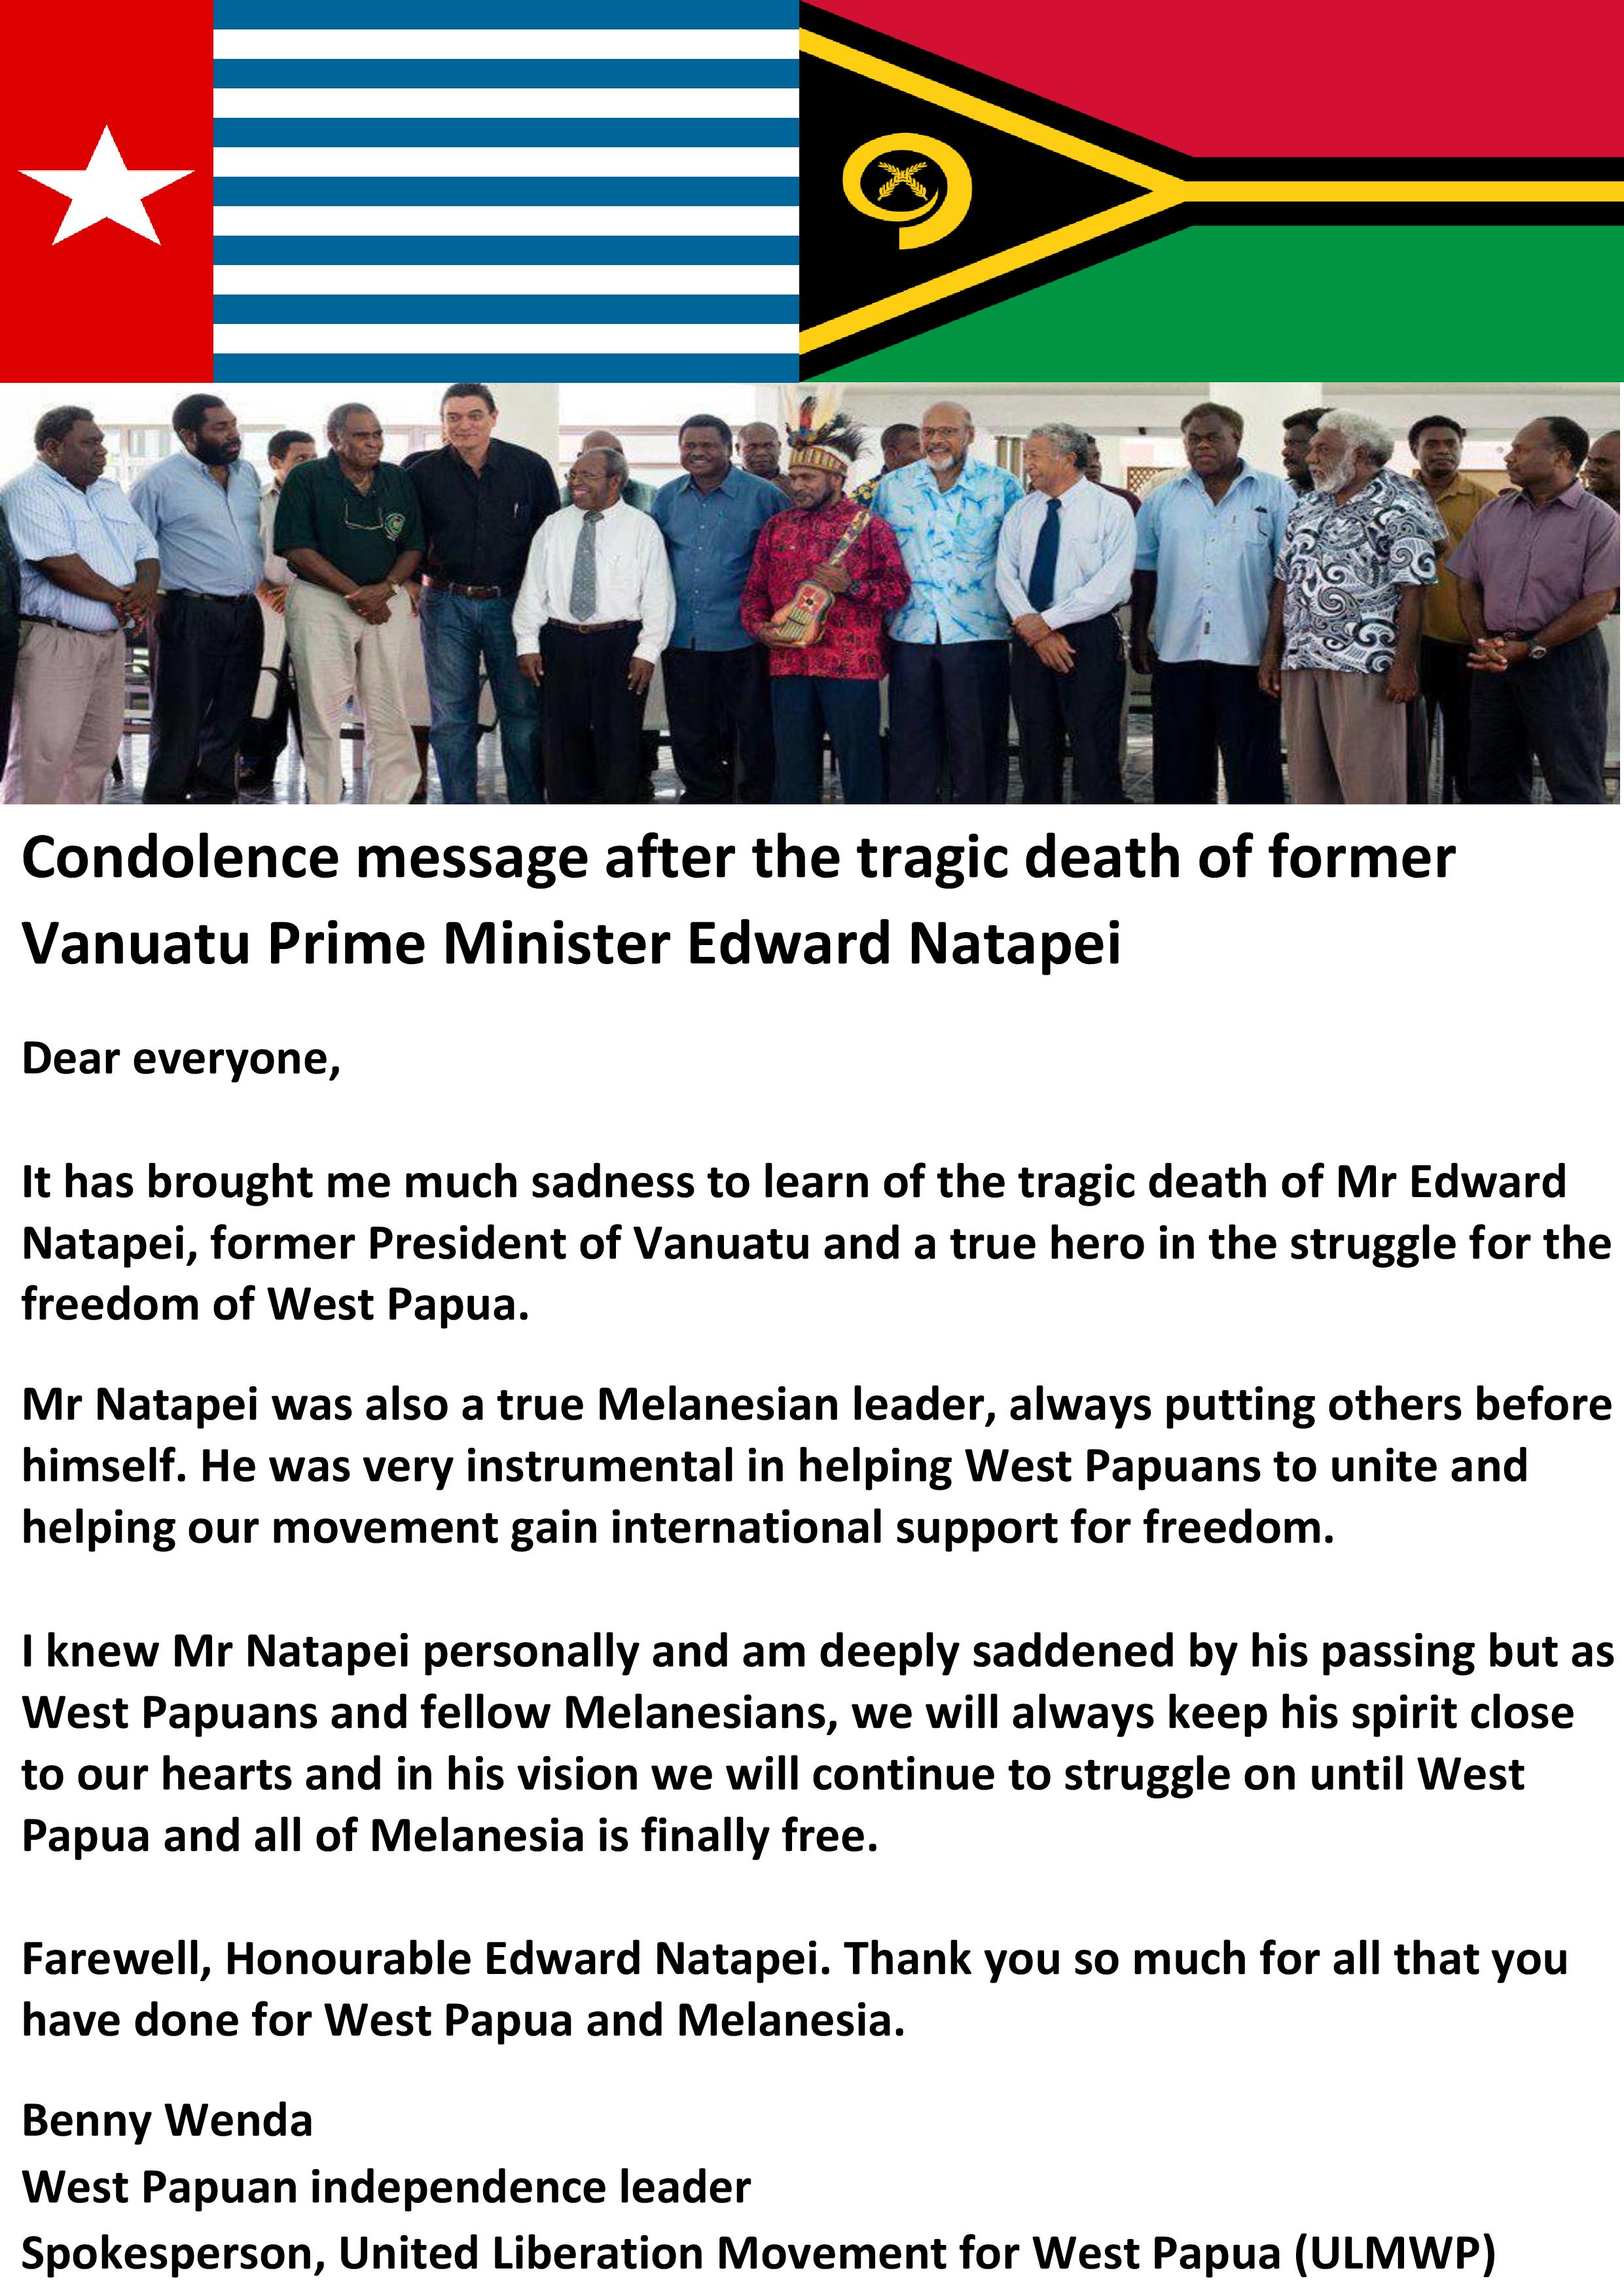 Letter of condolence after the death of former Prime Minister of Vanuatu, Edward Natapei